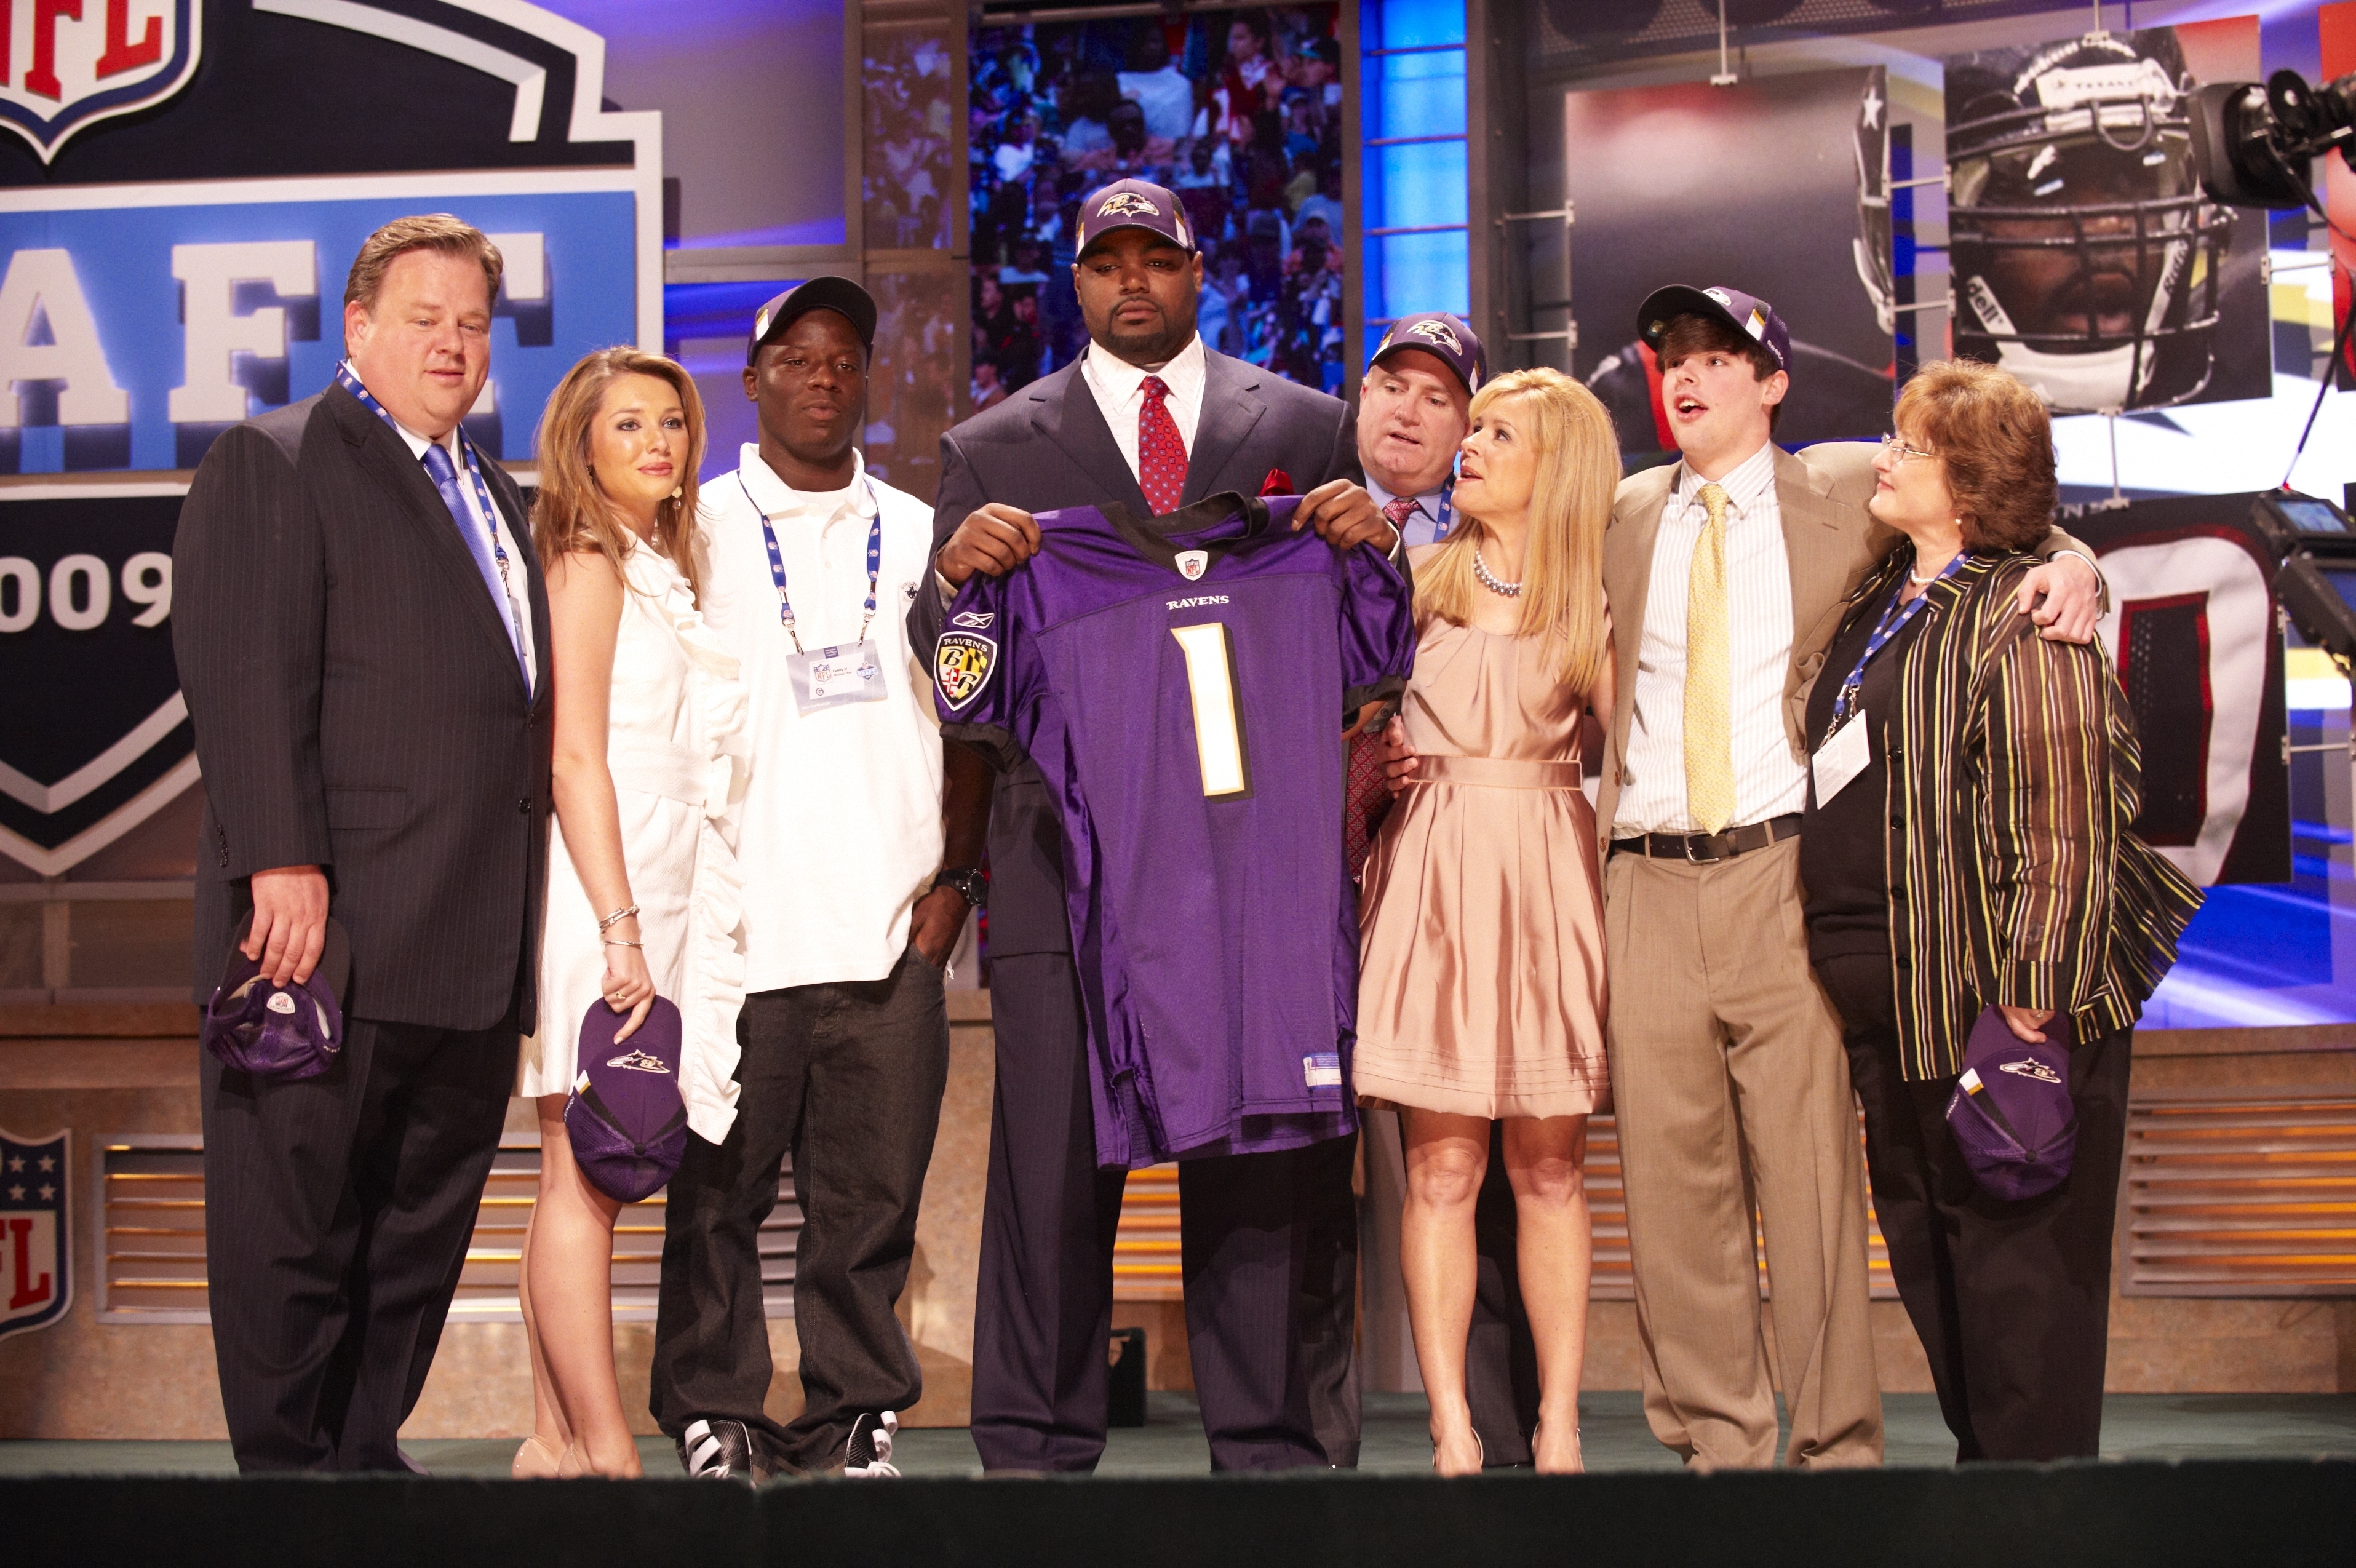 Michael Oher and the Tuohys when he was drafted to the Baltimore Ravens